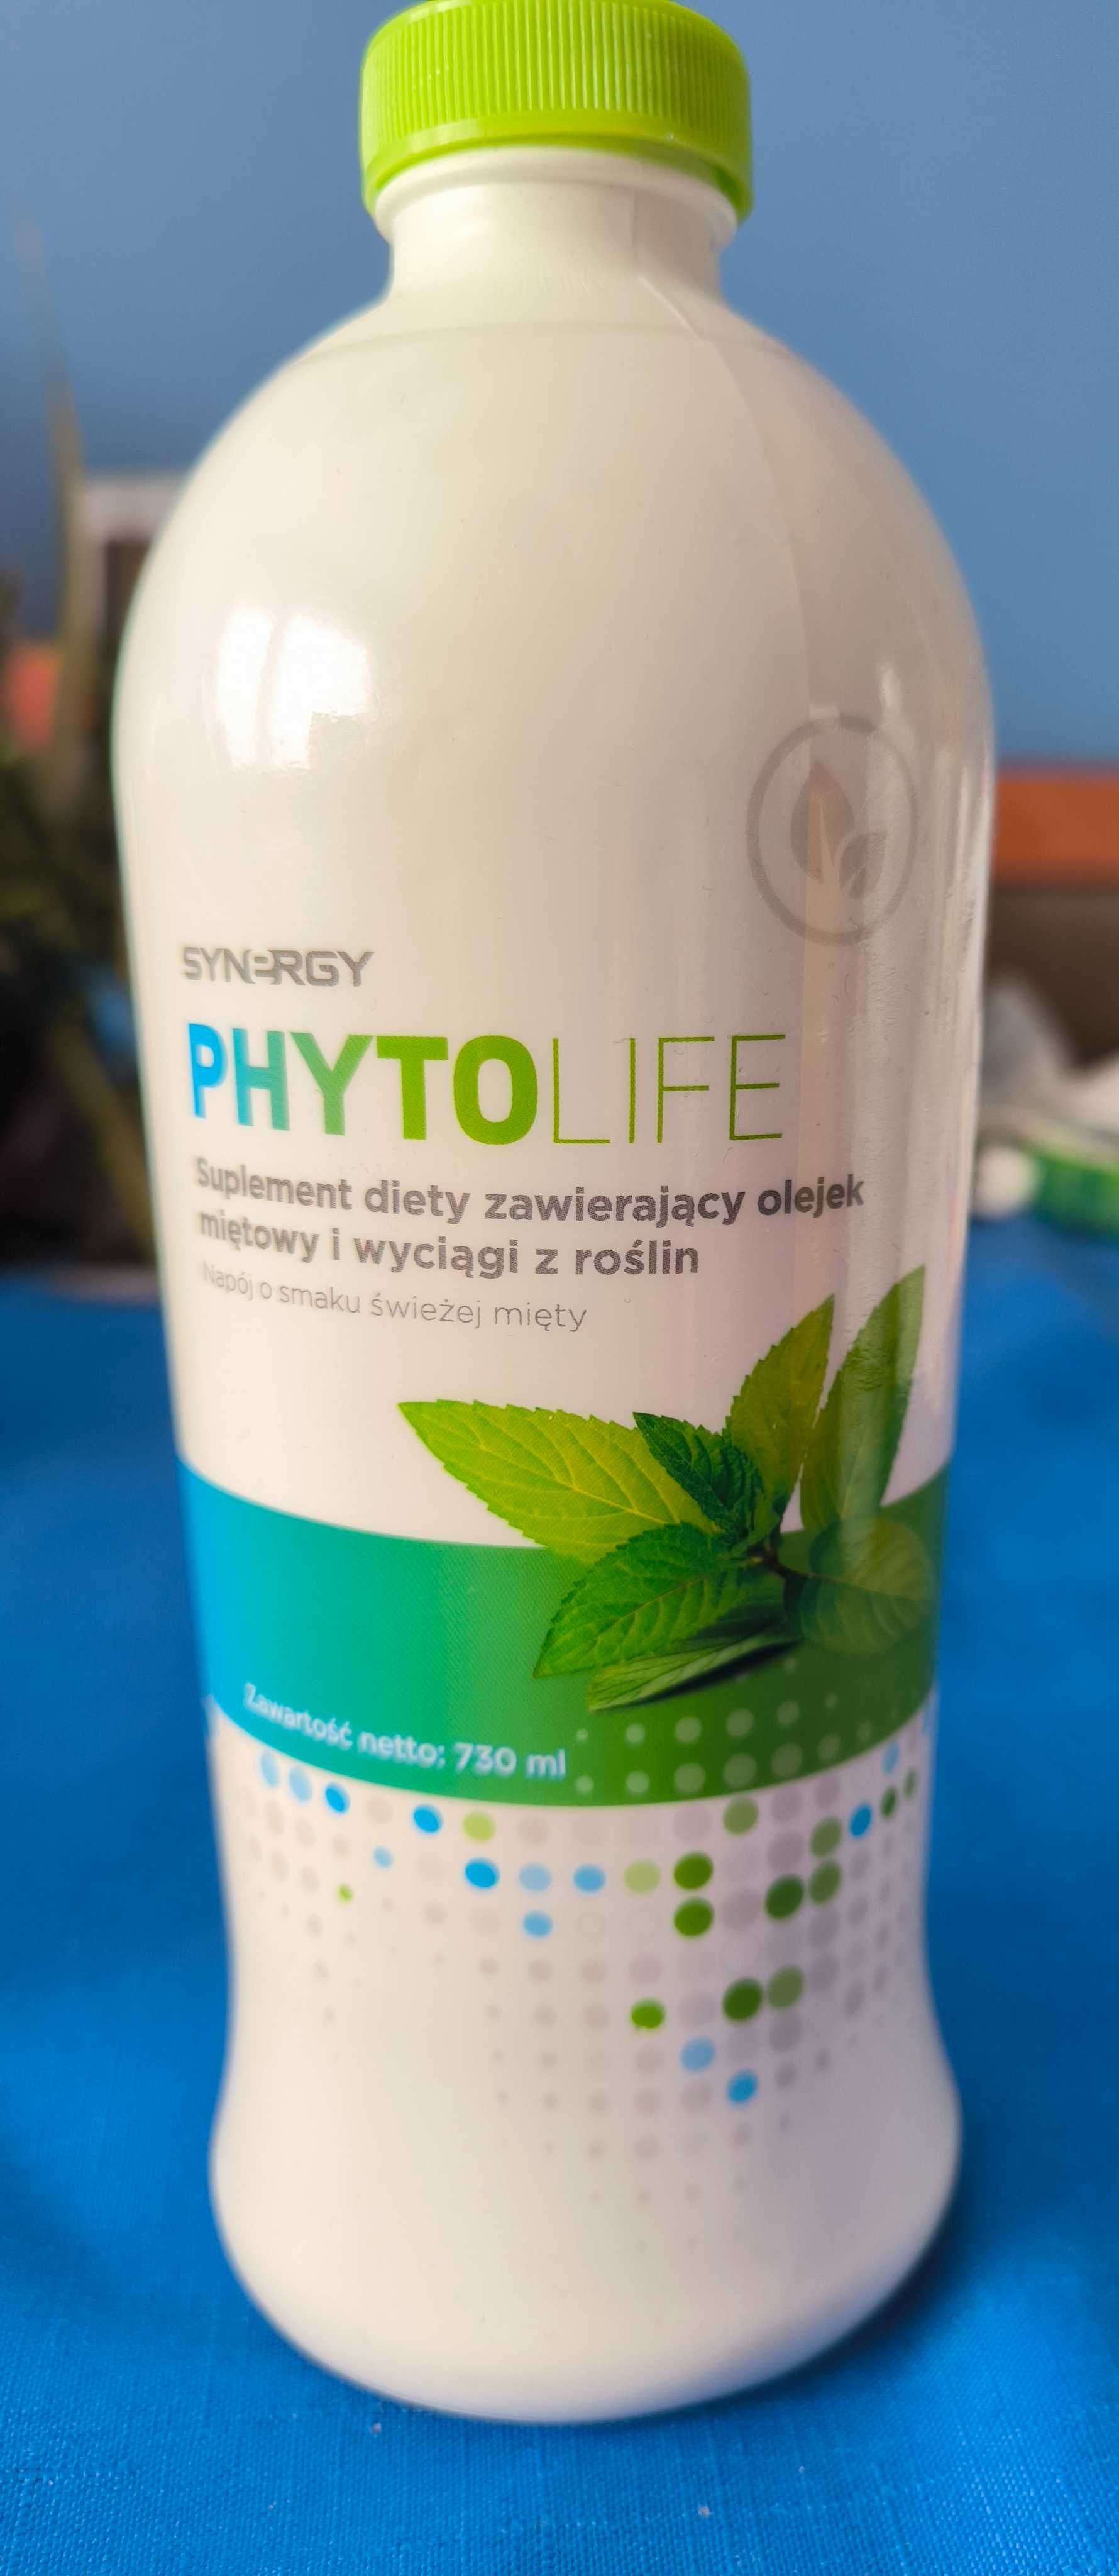 PhytoLife suplement diety